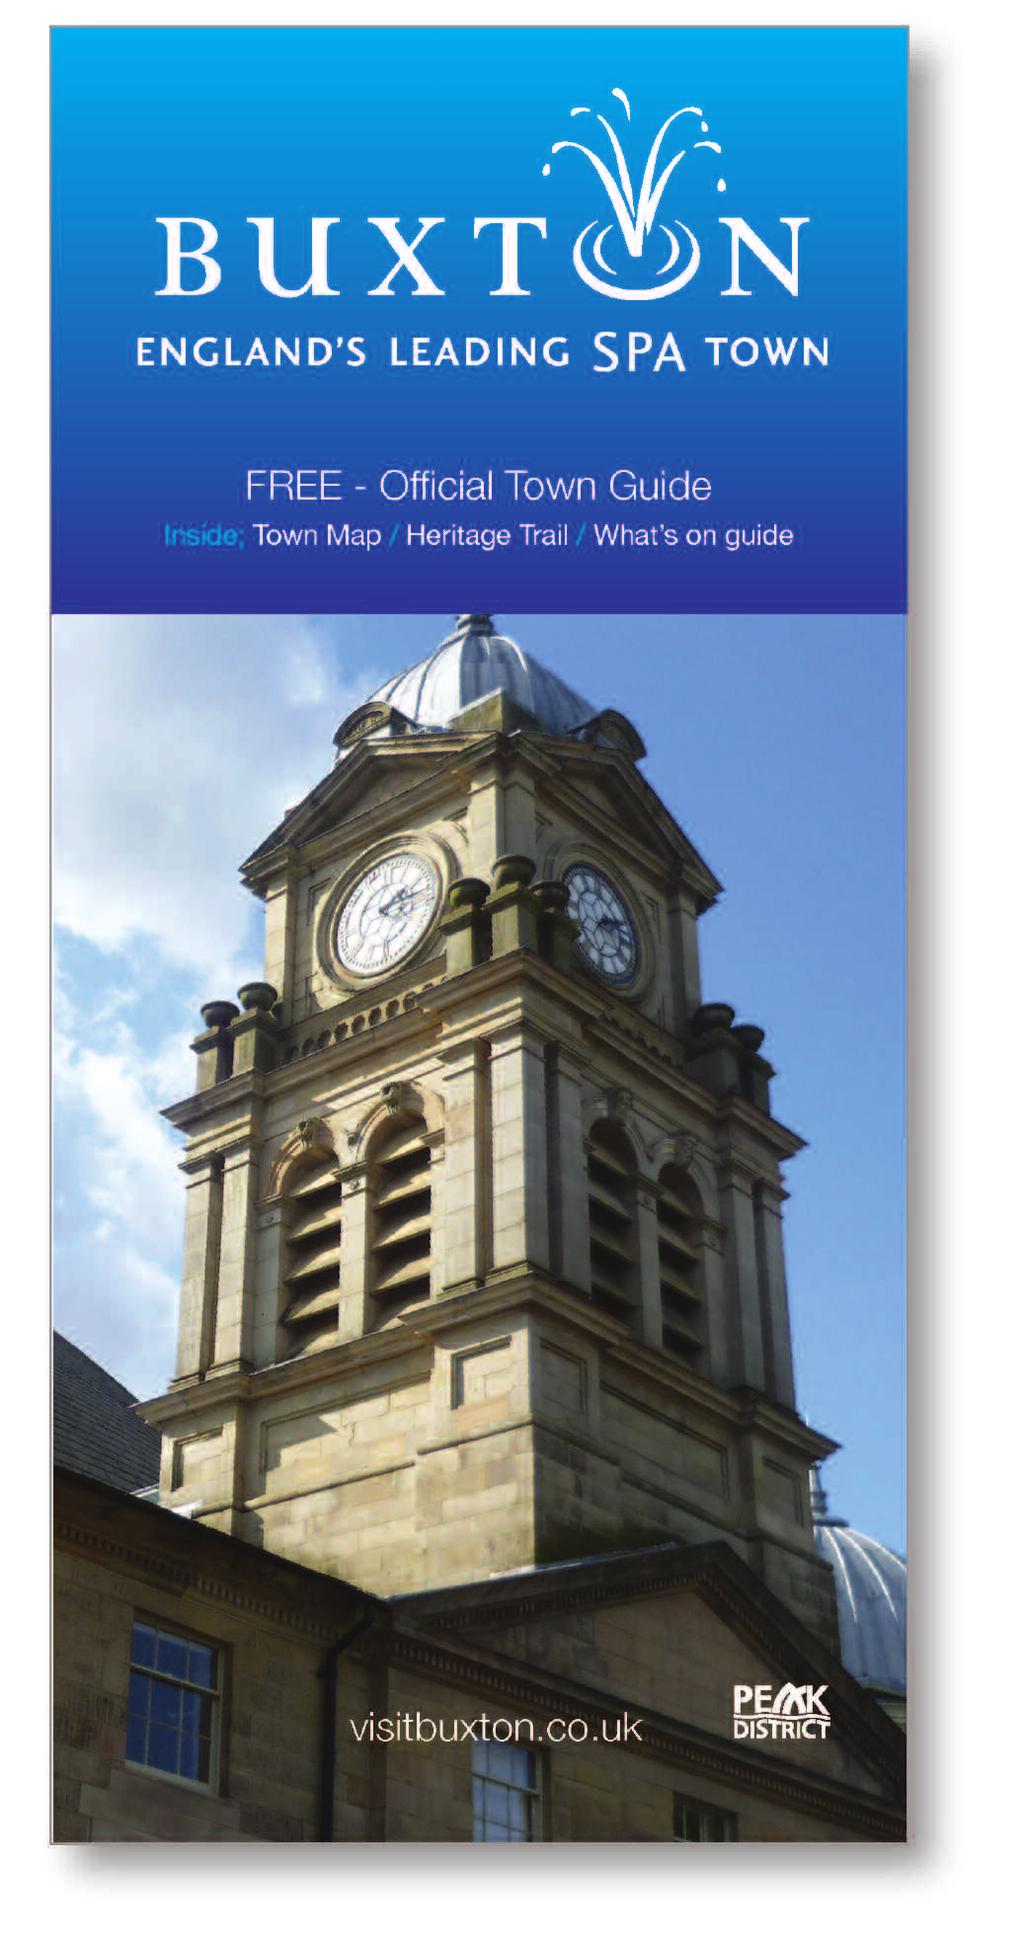 Applications Buxton town guide Stunning photography combined with the